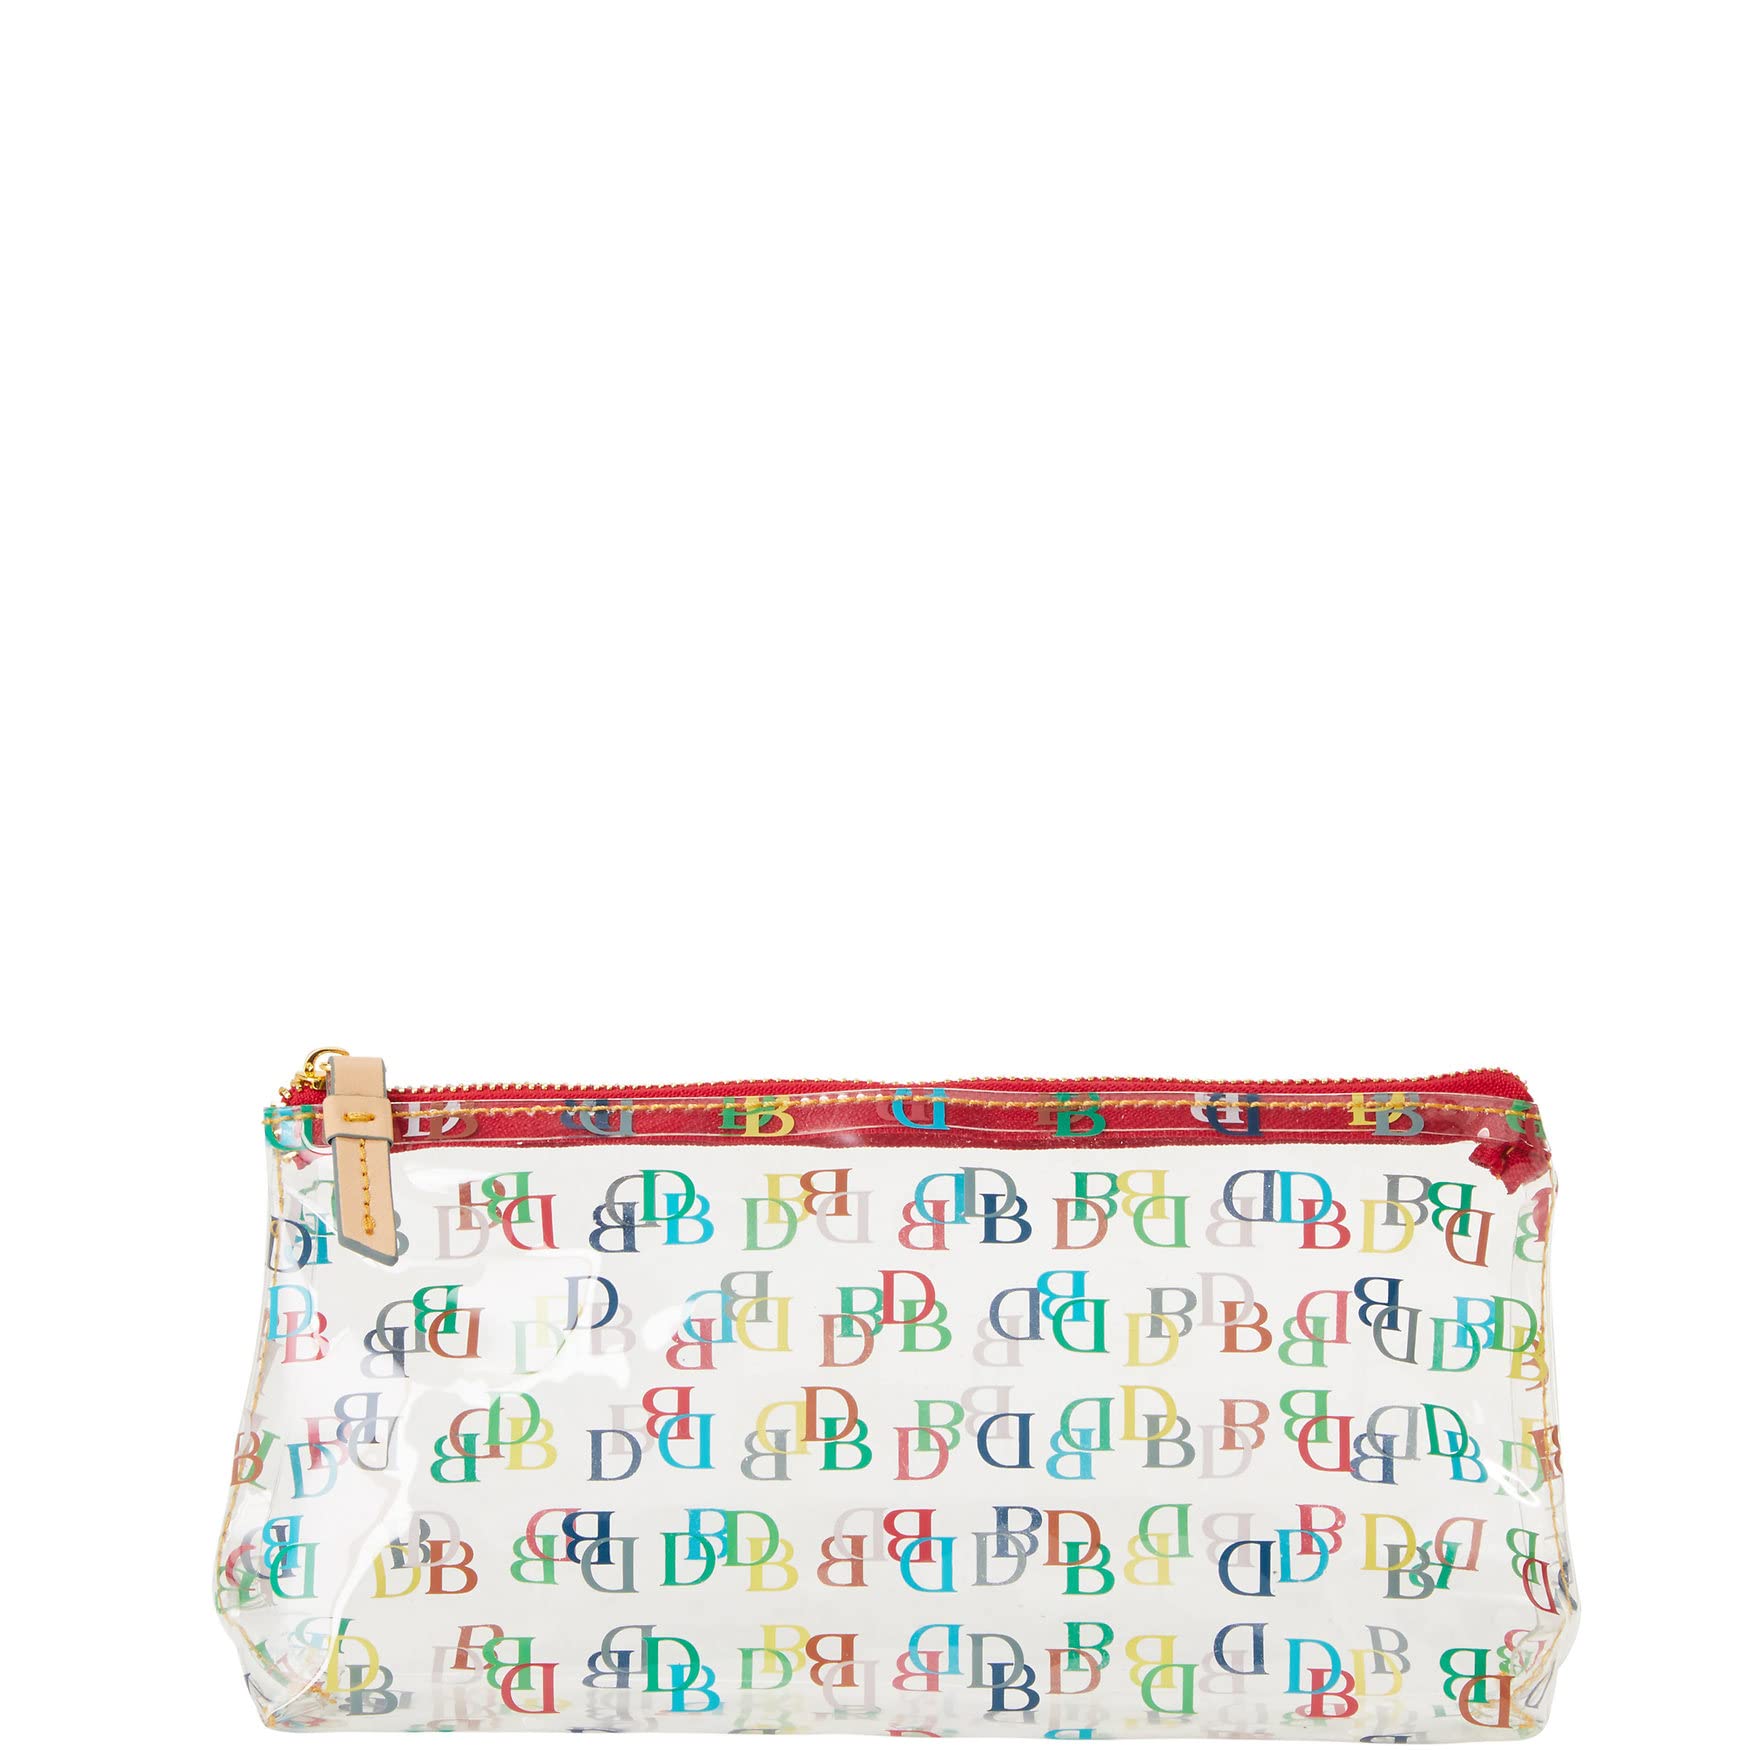 Dooney & Bourke Accessory, It On The Go Cosmetic Case